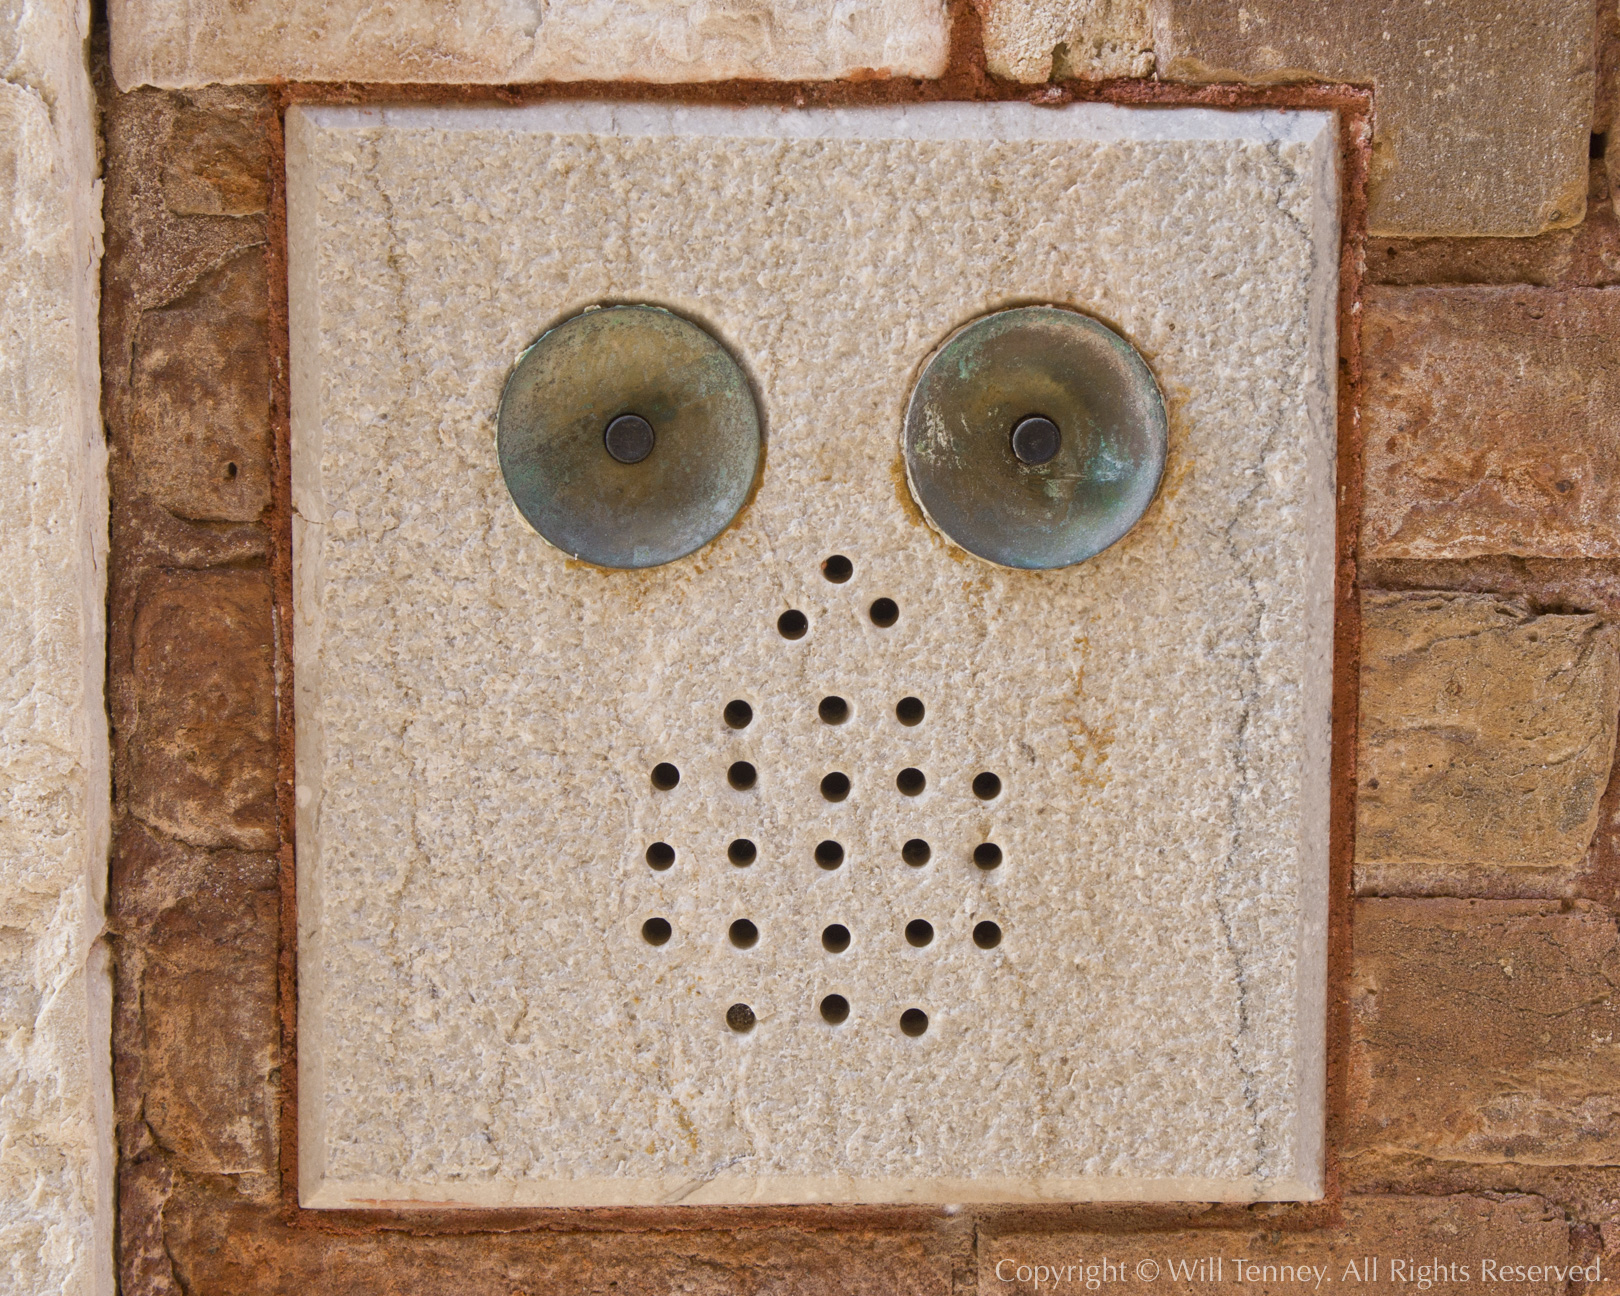 Venice Doorbell #5: Photograph by Will Tenney